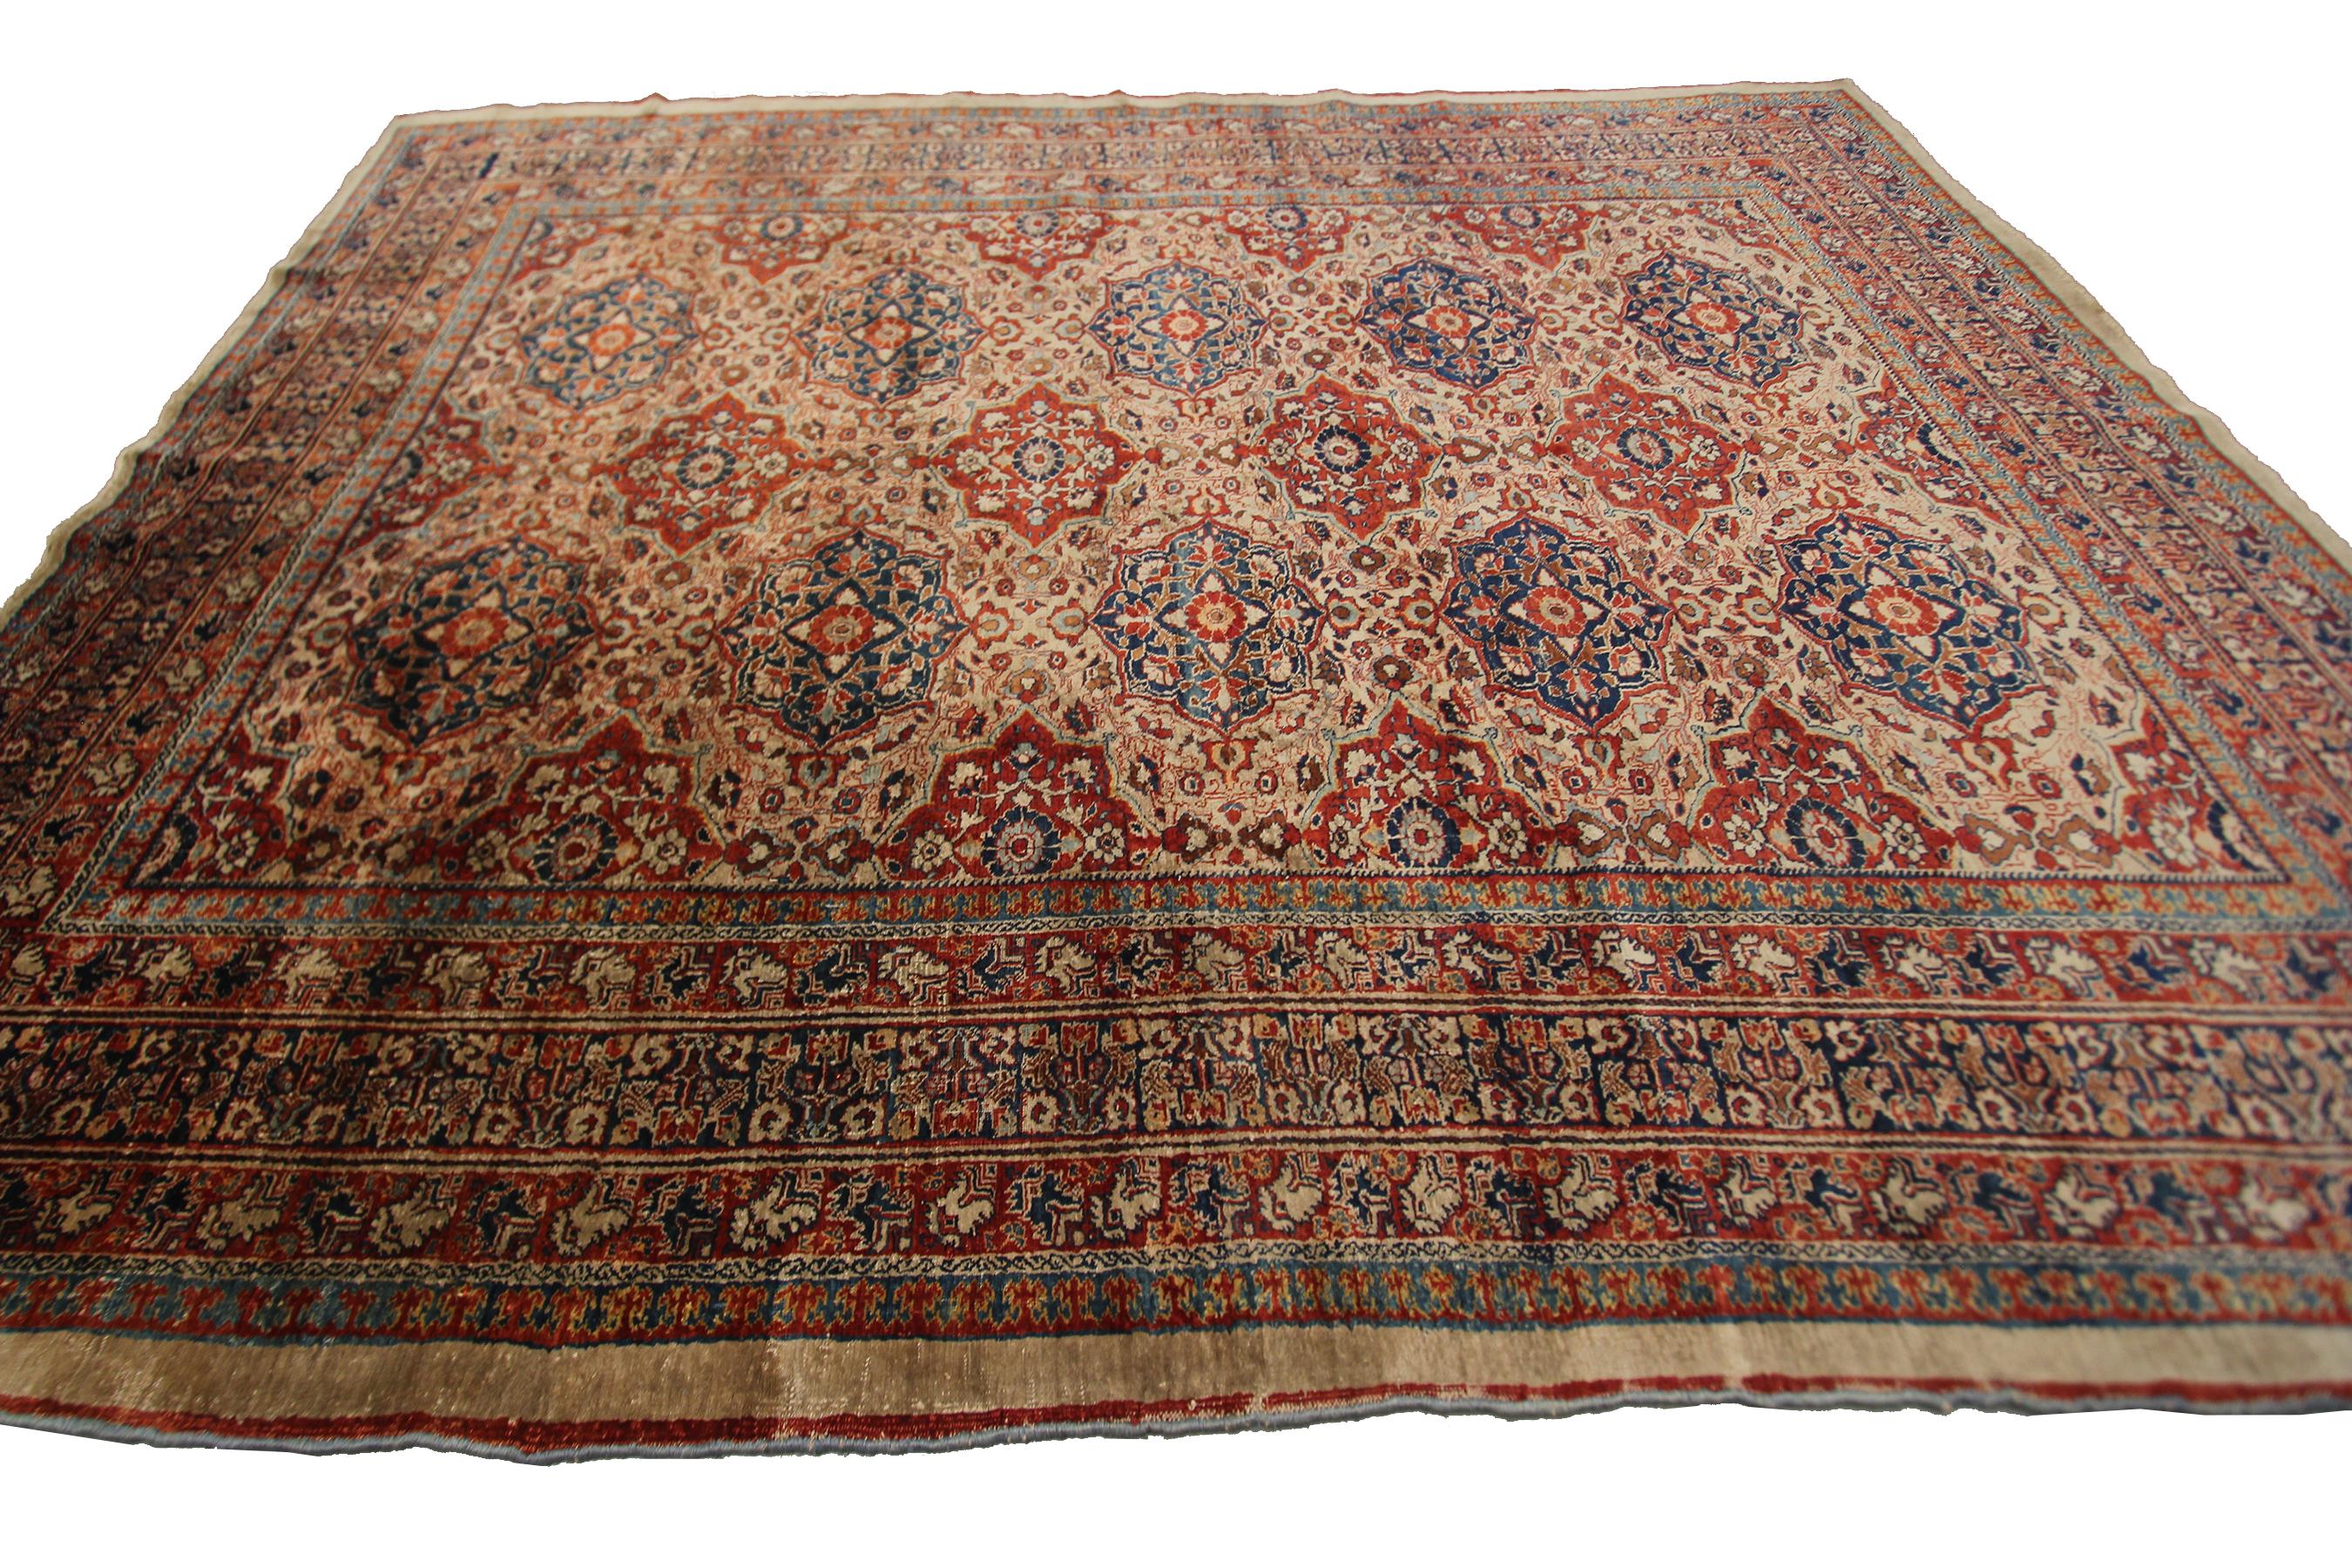 Mid-19th Century Mid 1800's Rare Antique Silk Heriz Rug Masterpiece 5x6 Tapestry 1860 For Sale